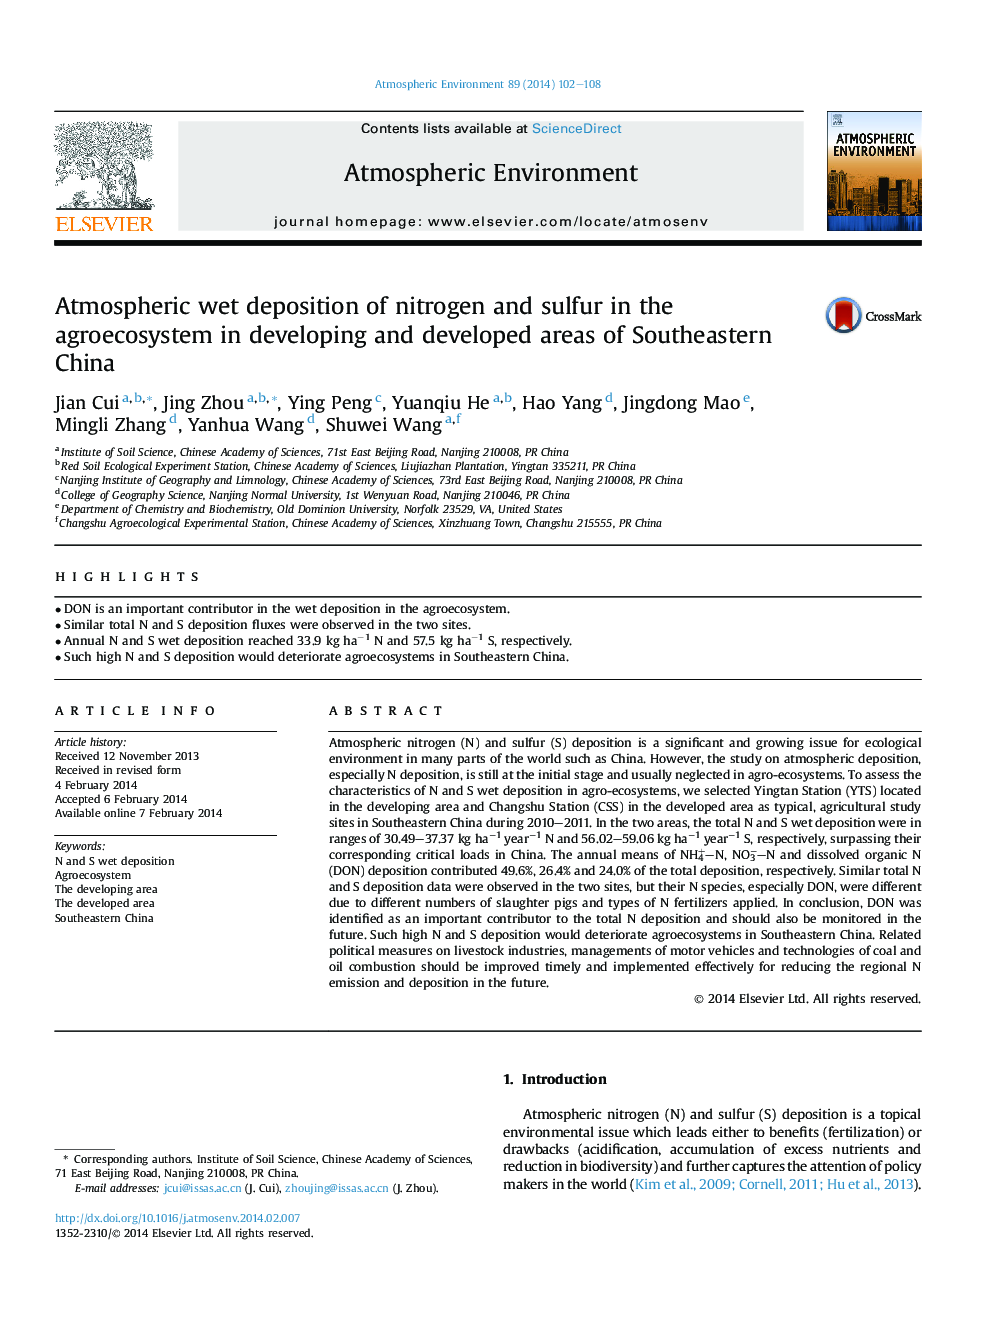 Atmospheric wet deposition of nitrogen and sulfur in the agroecosystem in developing and developed areas of Southeastern China